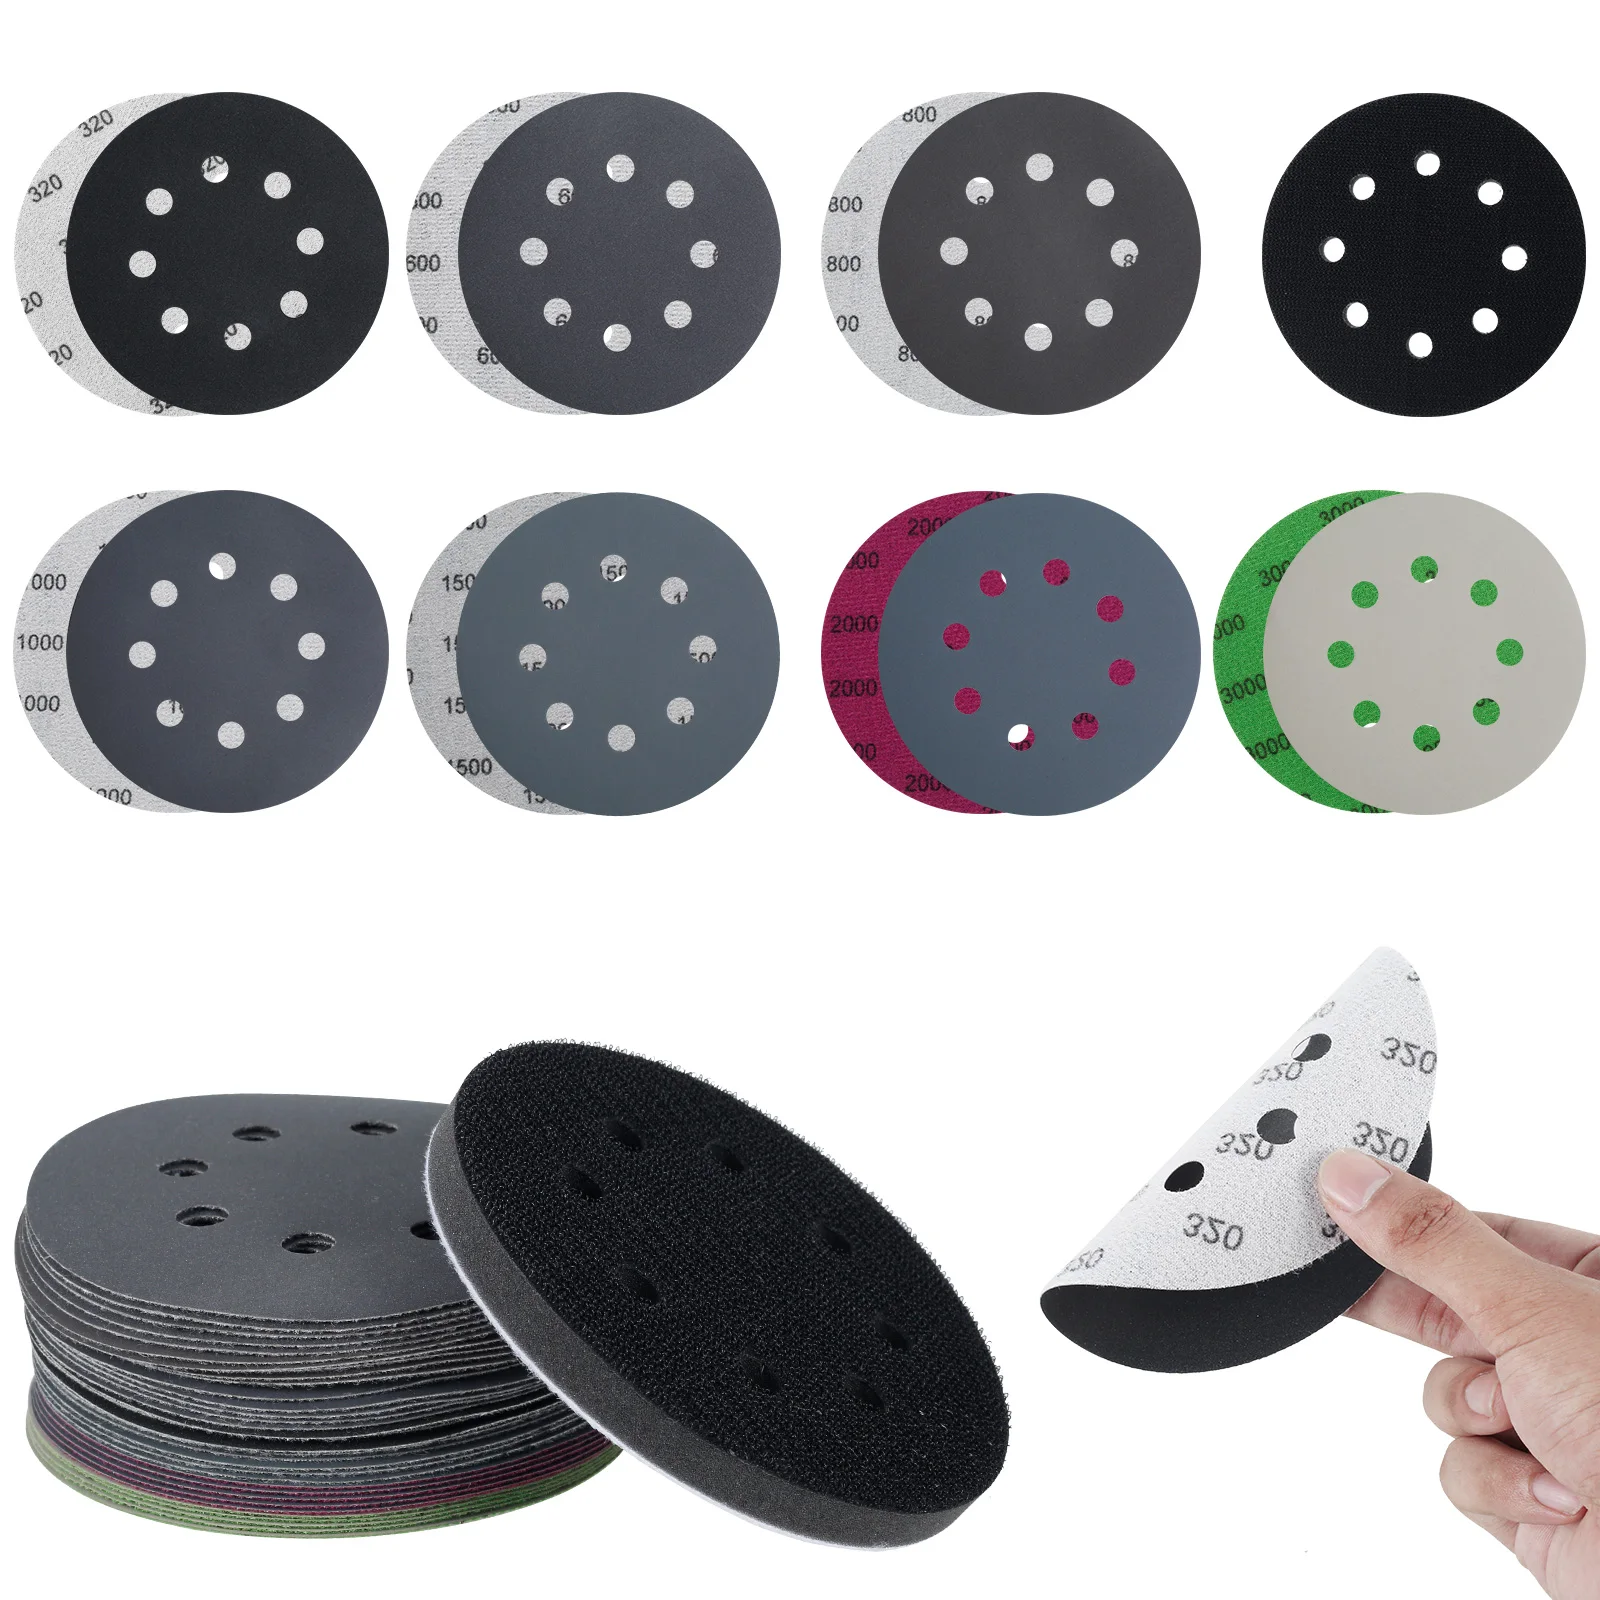 

36Pcs Sanding Disc Pads 5in Silicon Carbide Hook and Loop Sandpaper 320-3000 Mixed Grit 8 Holes Wet Dry Use Sanding Discs Pads